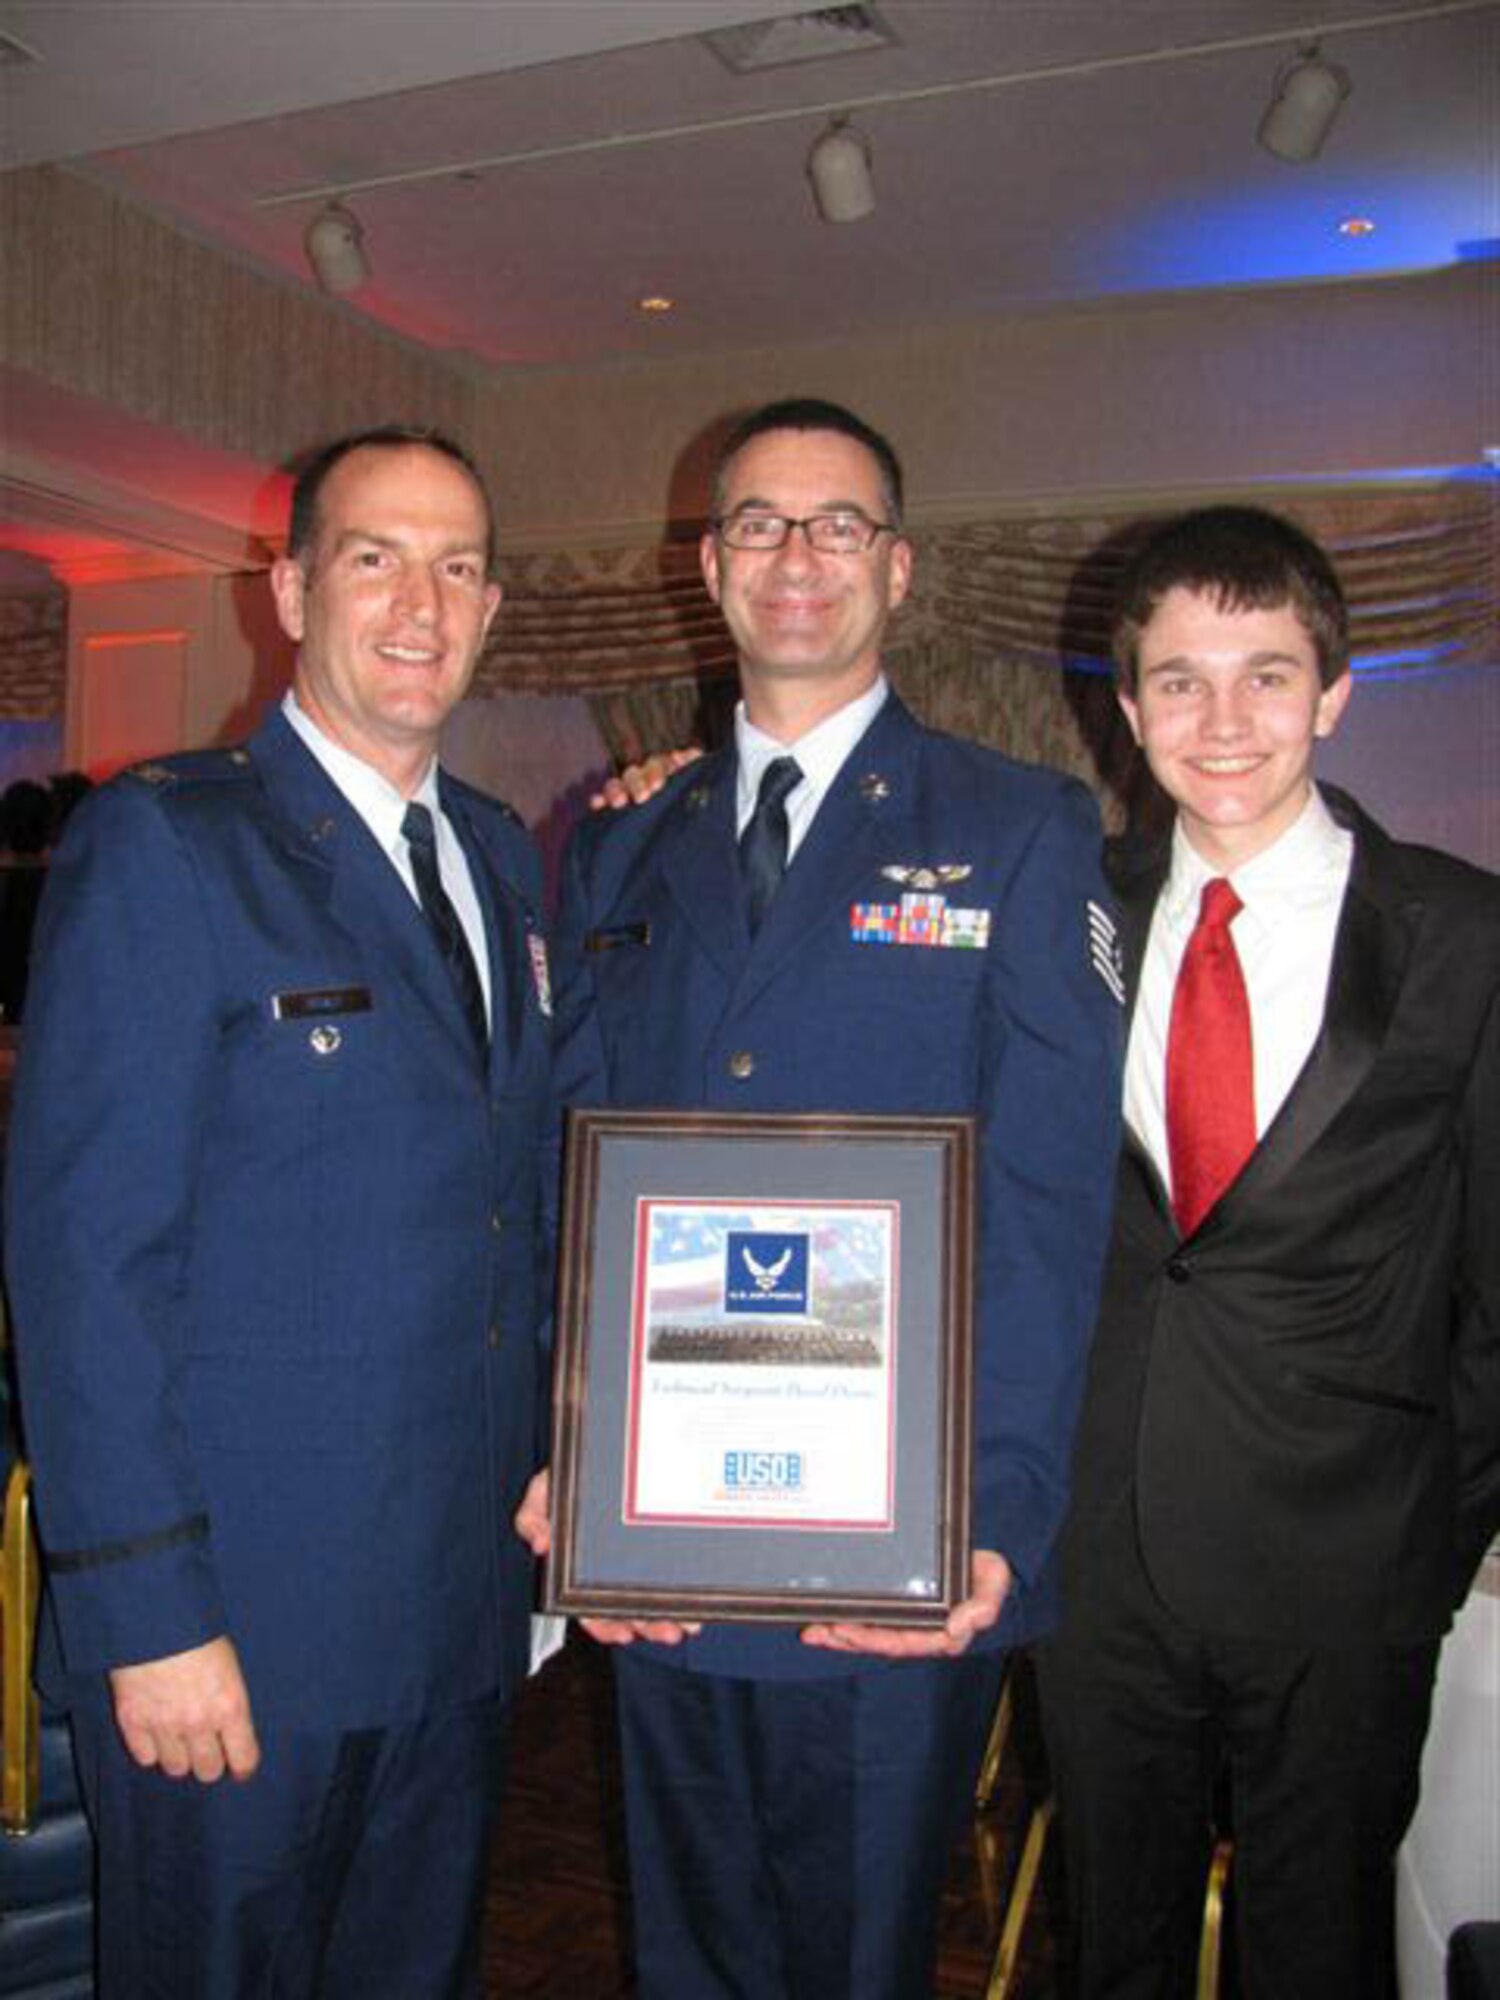 Col. John Healy, 439th Airlift Wing vice commander, congratulates Tech. Sgt. David Owens, 337th Airlift Squadron, who was honored April 2 at a Pioneer Valley USO event held in Holyoke, Mass. Sergeant Owens, joined by his son pictured here, was honored as the 22nd Air Force NCO of the Year. He will soon compete at the command-level awards. (US Air Force photo/Chief Master Sgt. Kathy Wood)